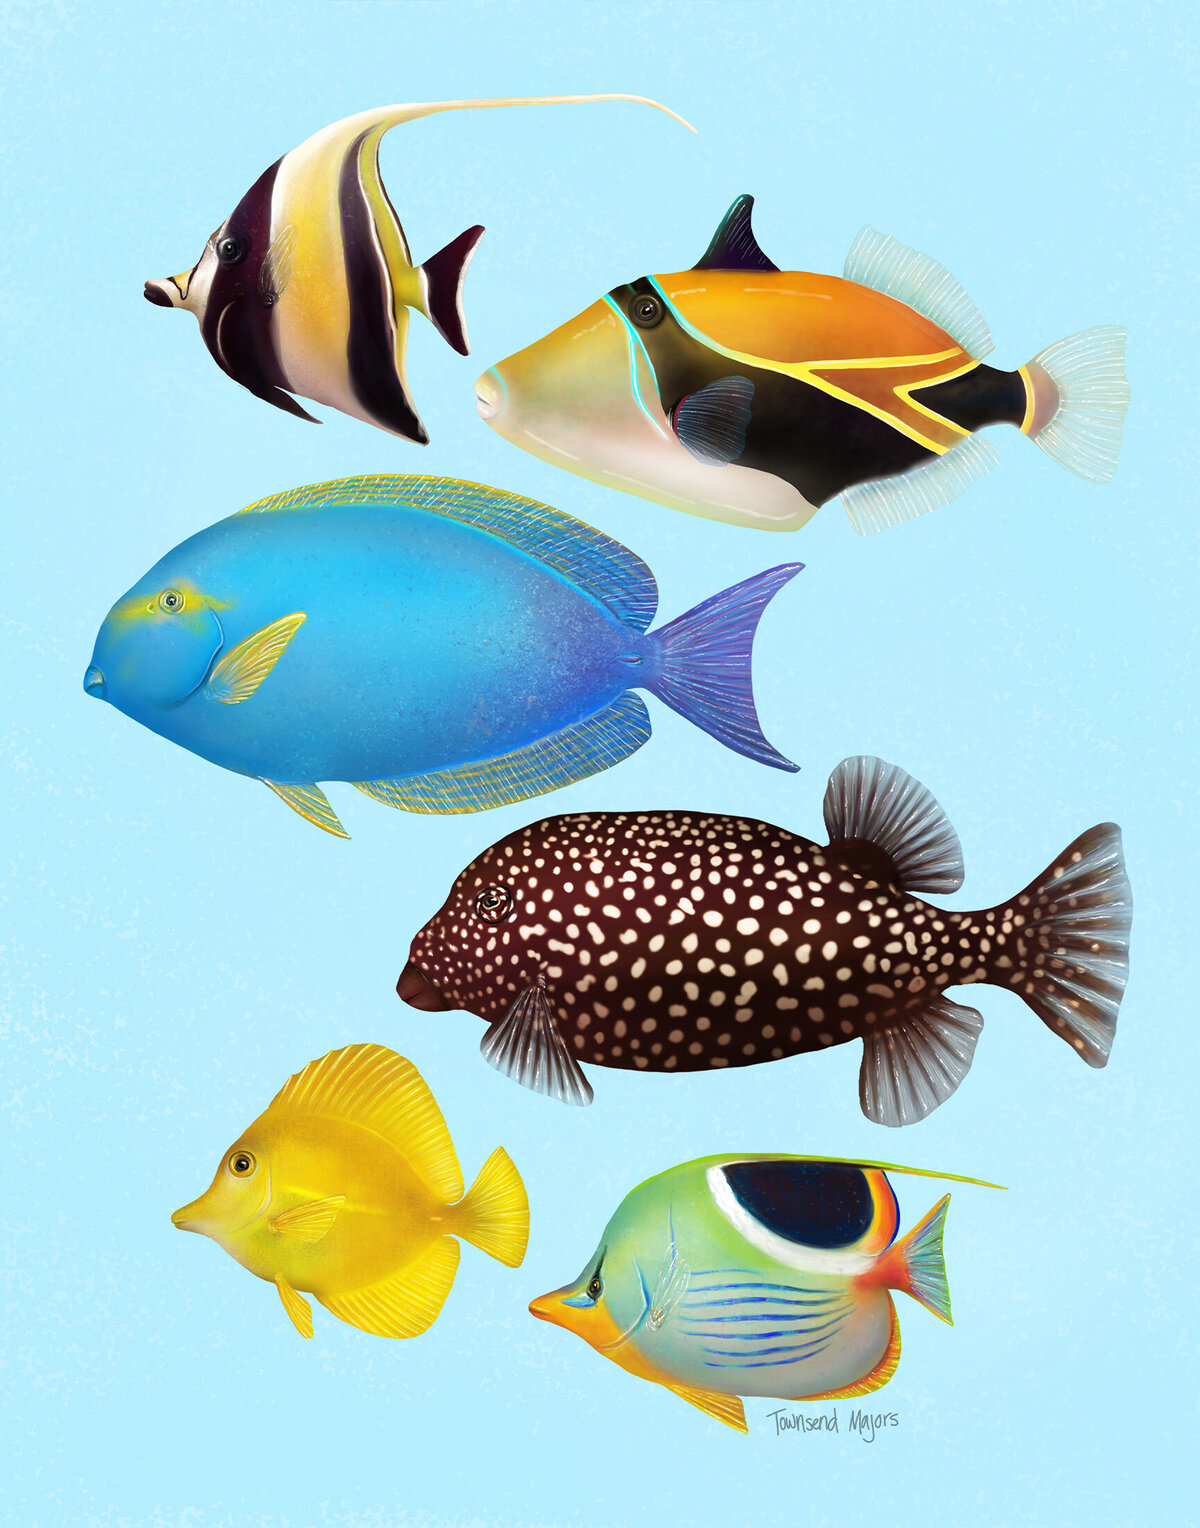 Townsend Majors illustration of various reef fish found in Hawaii